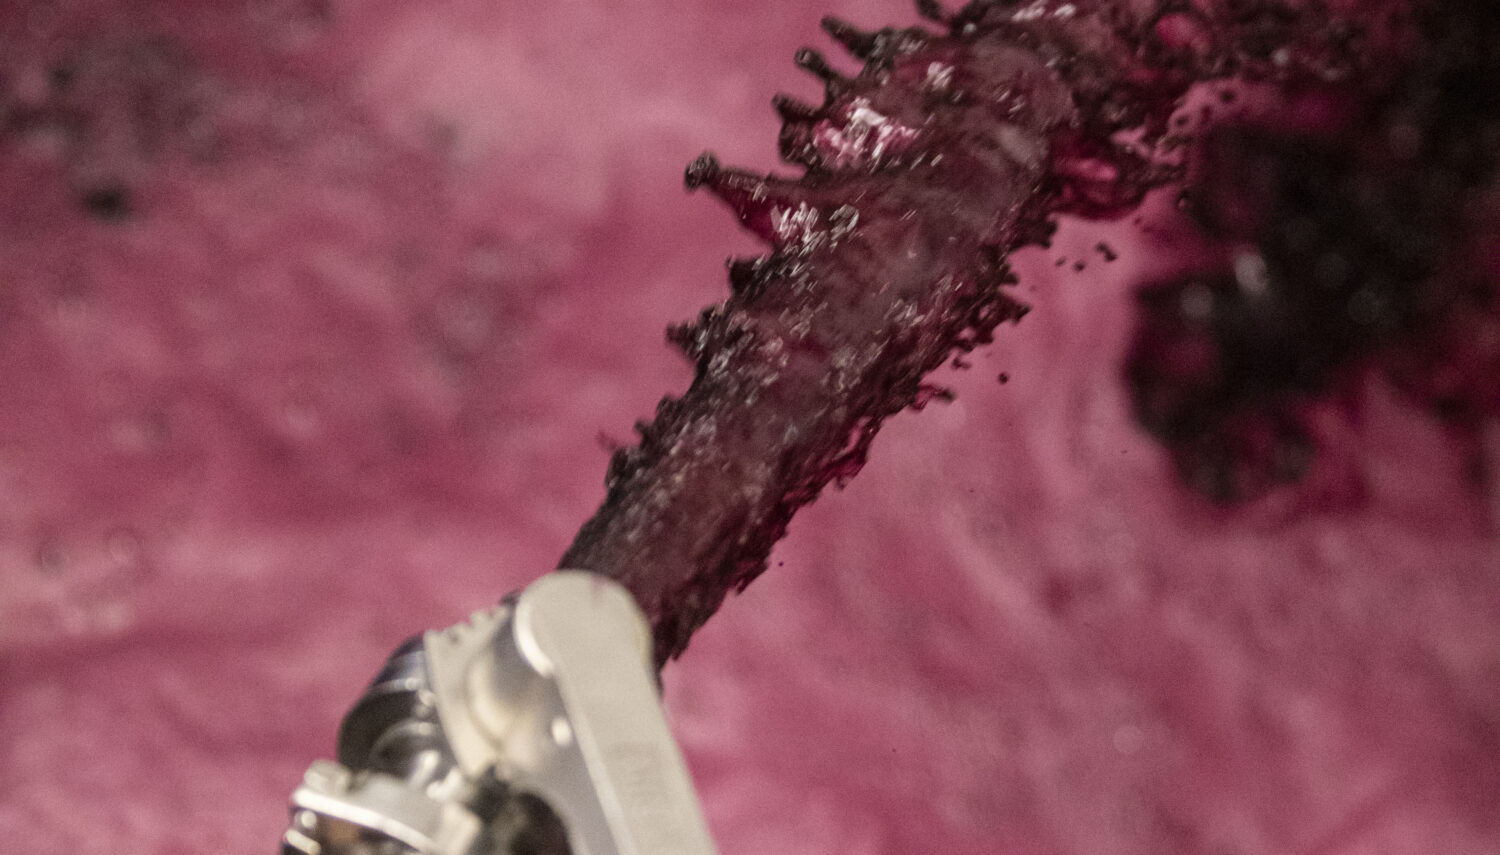 Hands hold a hose with a metal nozzle that sprays red grape juice into a vessel holding more grape juice and pink foam.